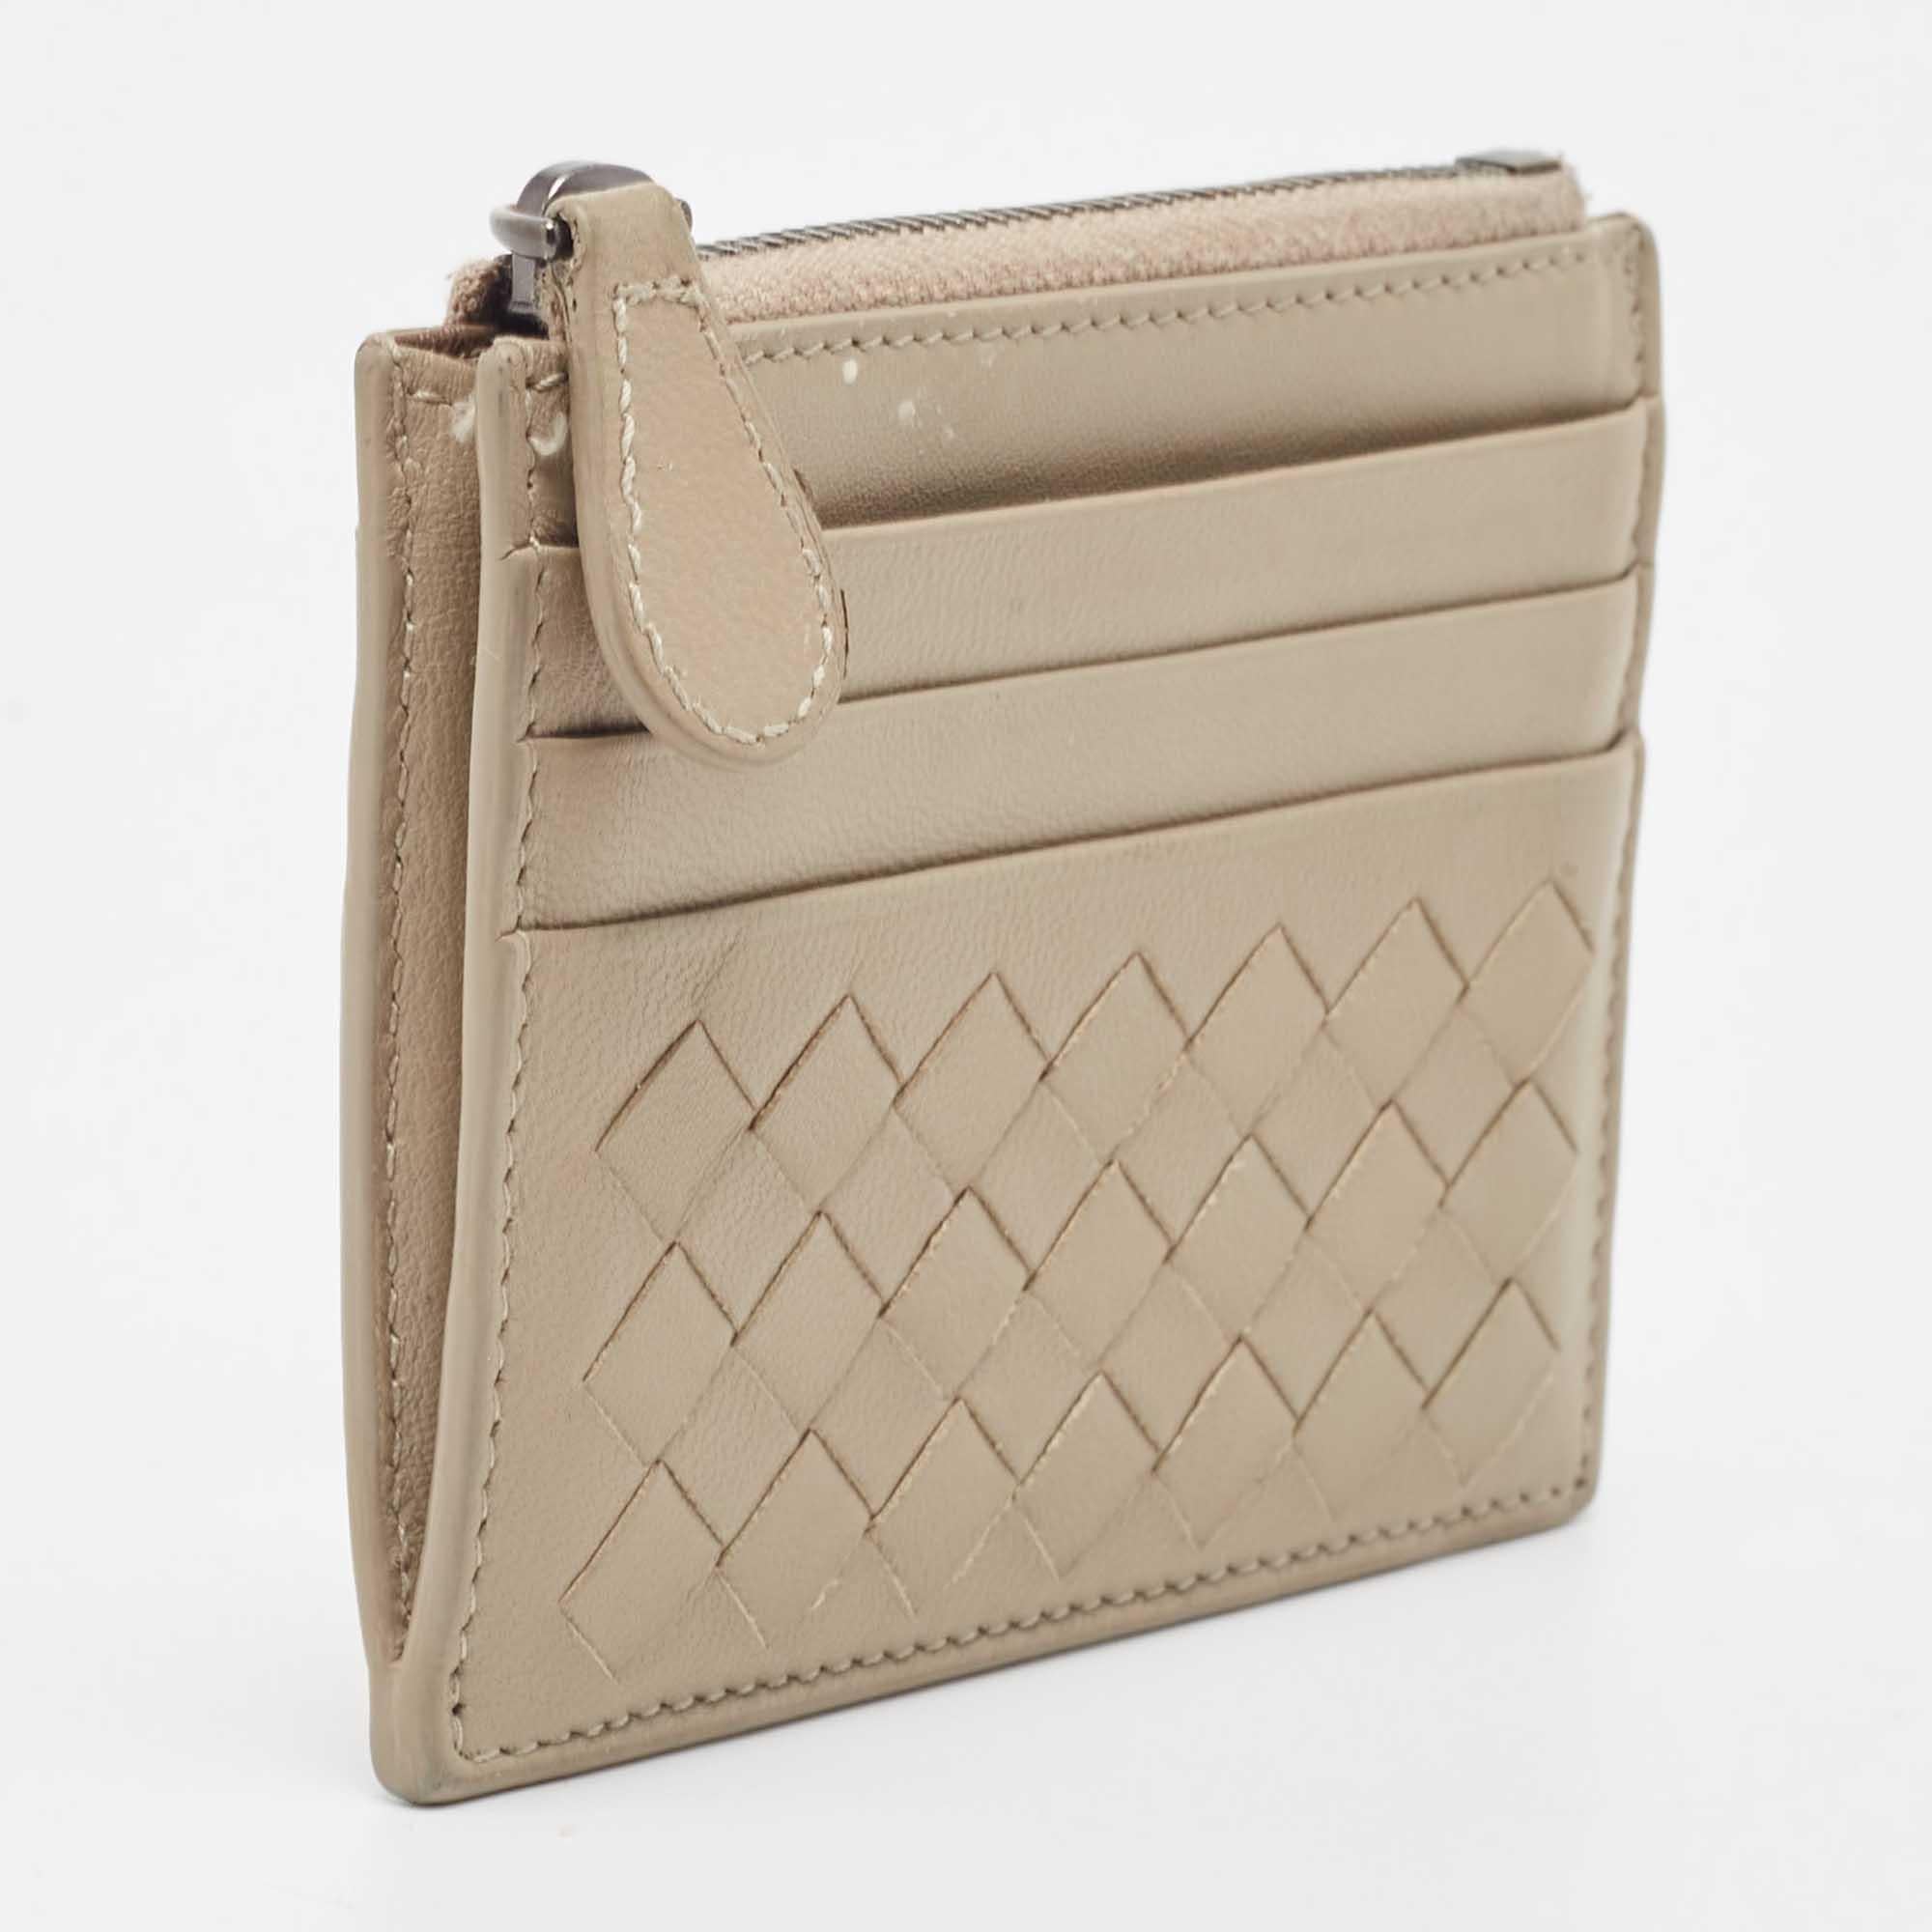 Crafted out of quality leather in their signature Intrecciato pattern, this card-holder by Bottega Veneta comes equipped with multiple slots and a zipped compartment to dutifully hold your cards. It can easily be slipped into your pocket and wallets